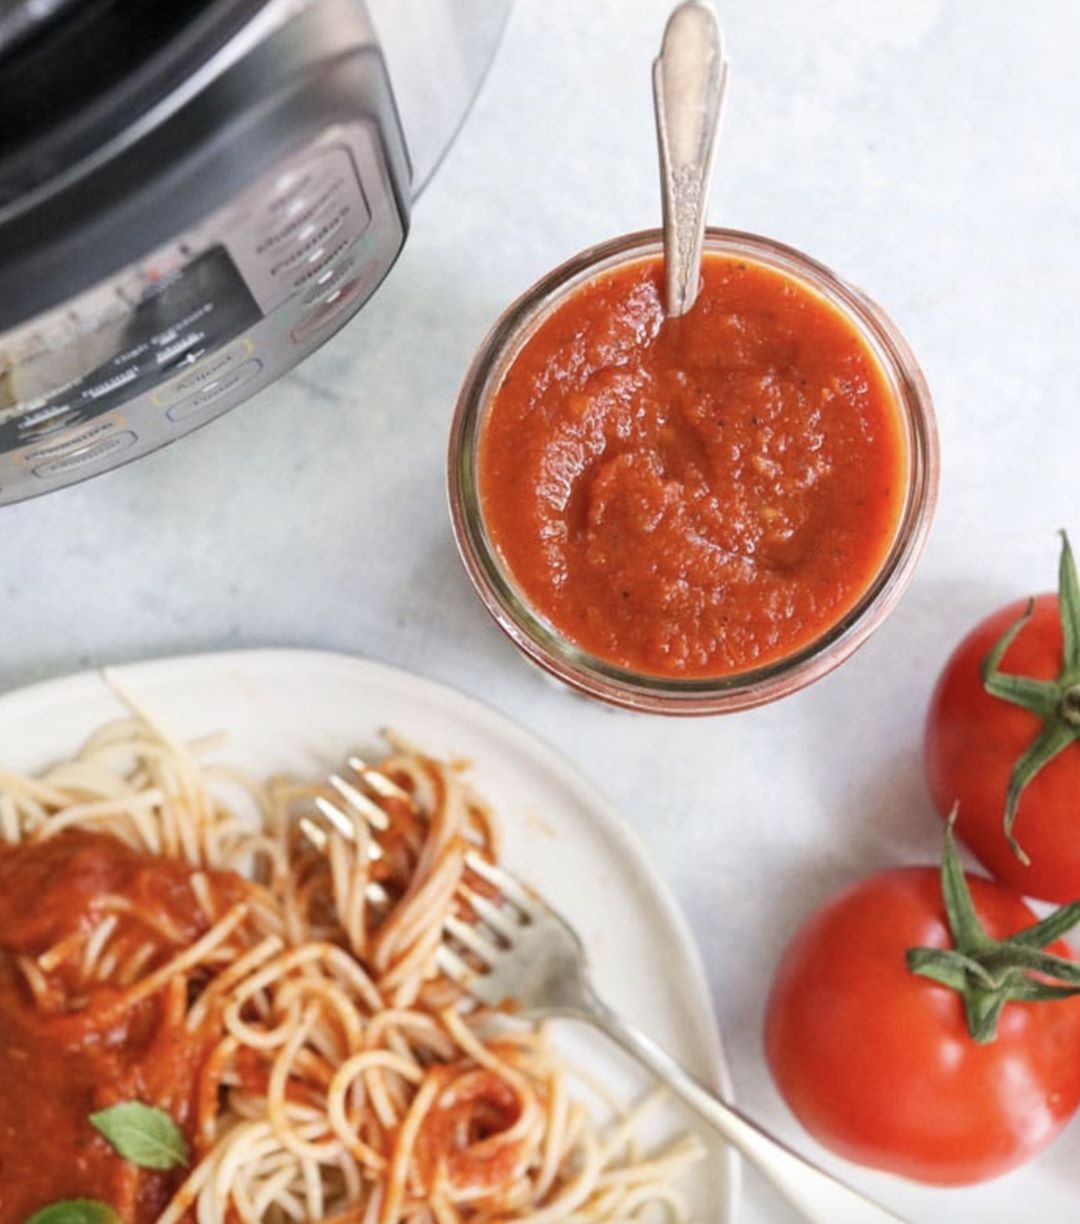 Making spaghetti sauce at home just got a LOT easier. When you use the Instant P…